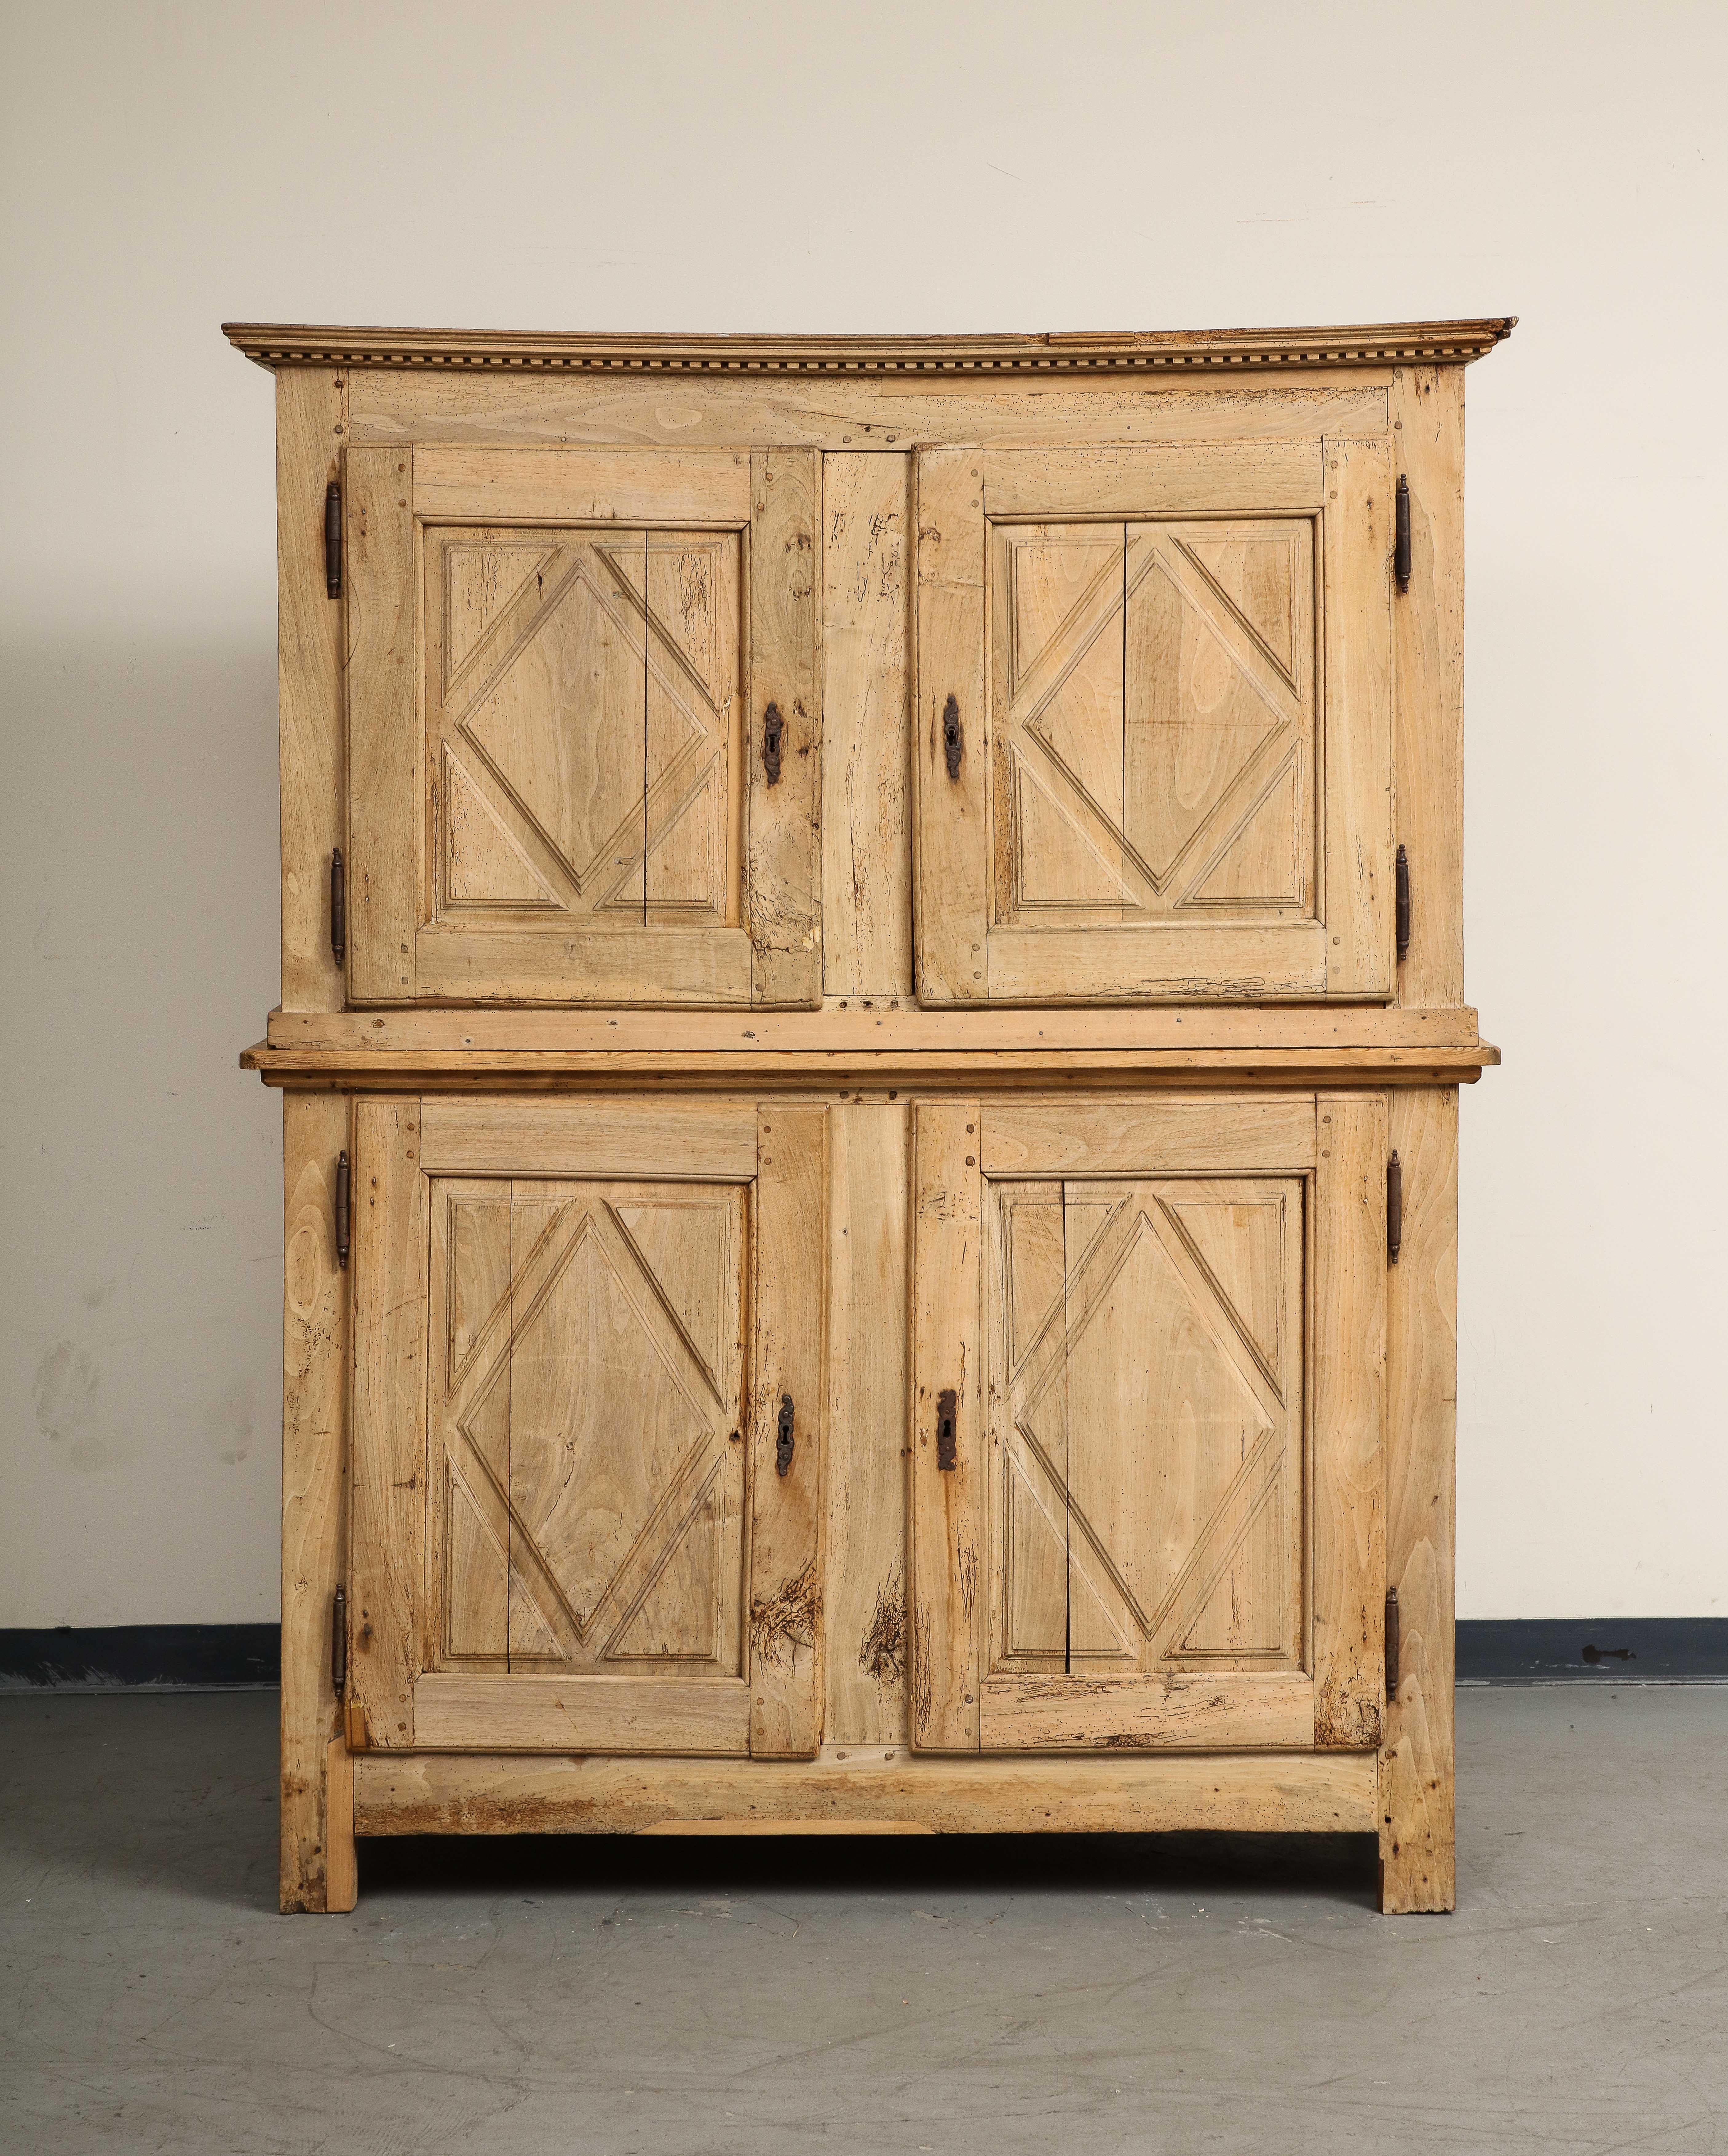 19th century French carved oak armoire with TV mount in upper portion. Diamond design on all four cabinet doors and side panels. Original hardware. 

Additional dimensions 
Top 35